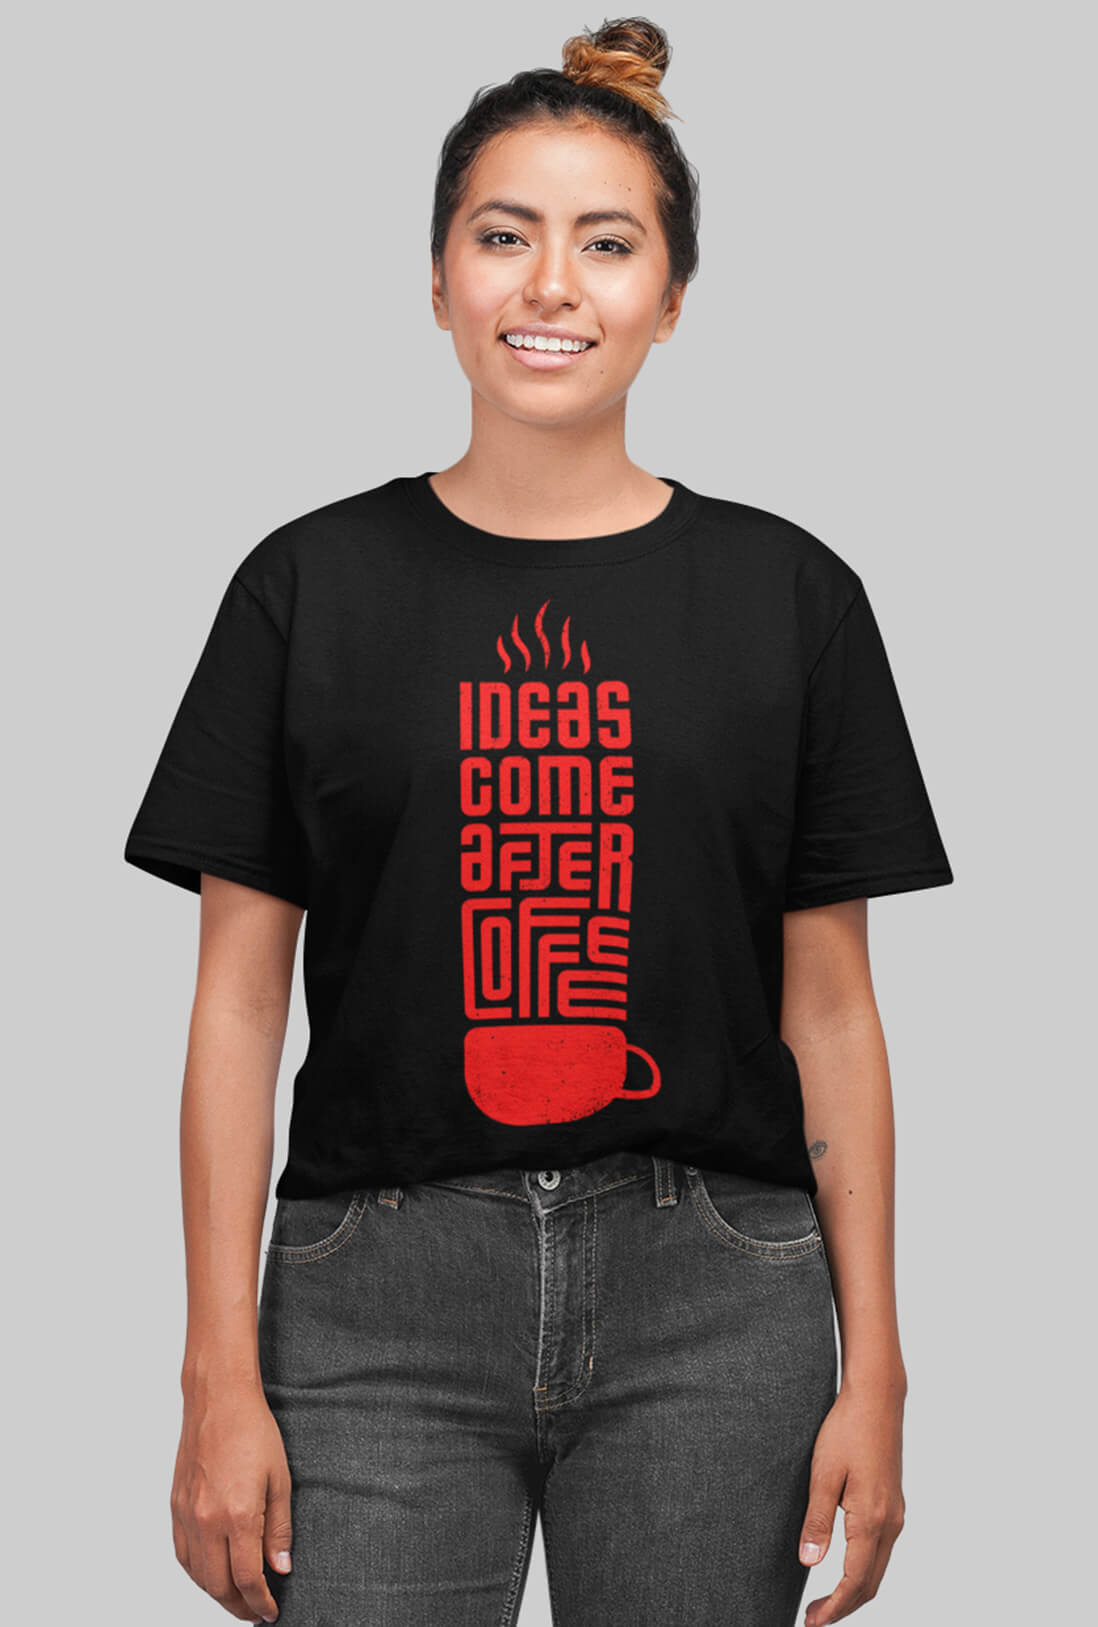 Idea Come After Coffee Women's Oversized T-Shirt